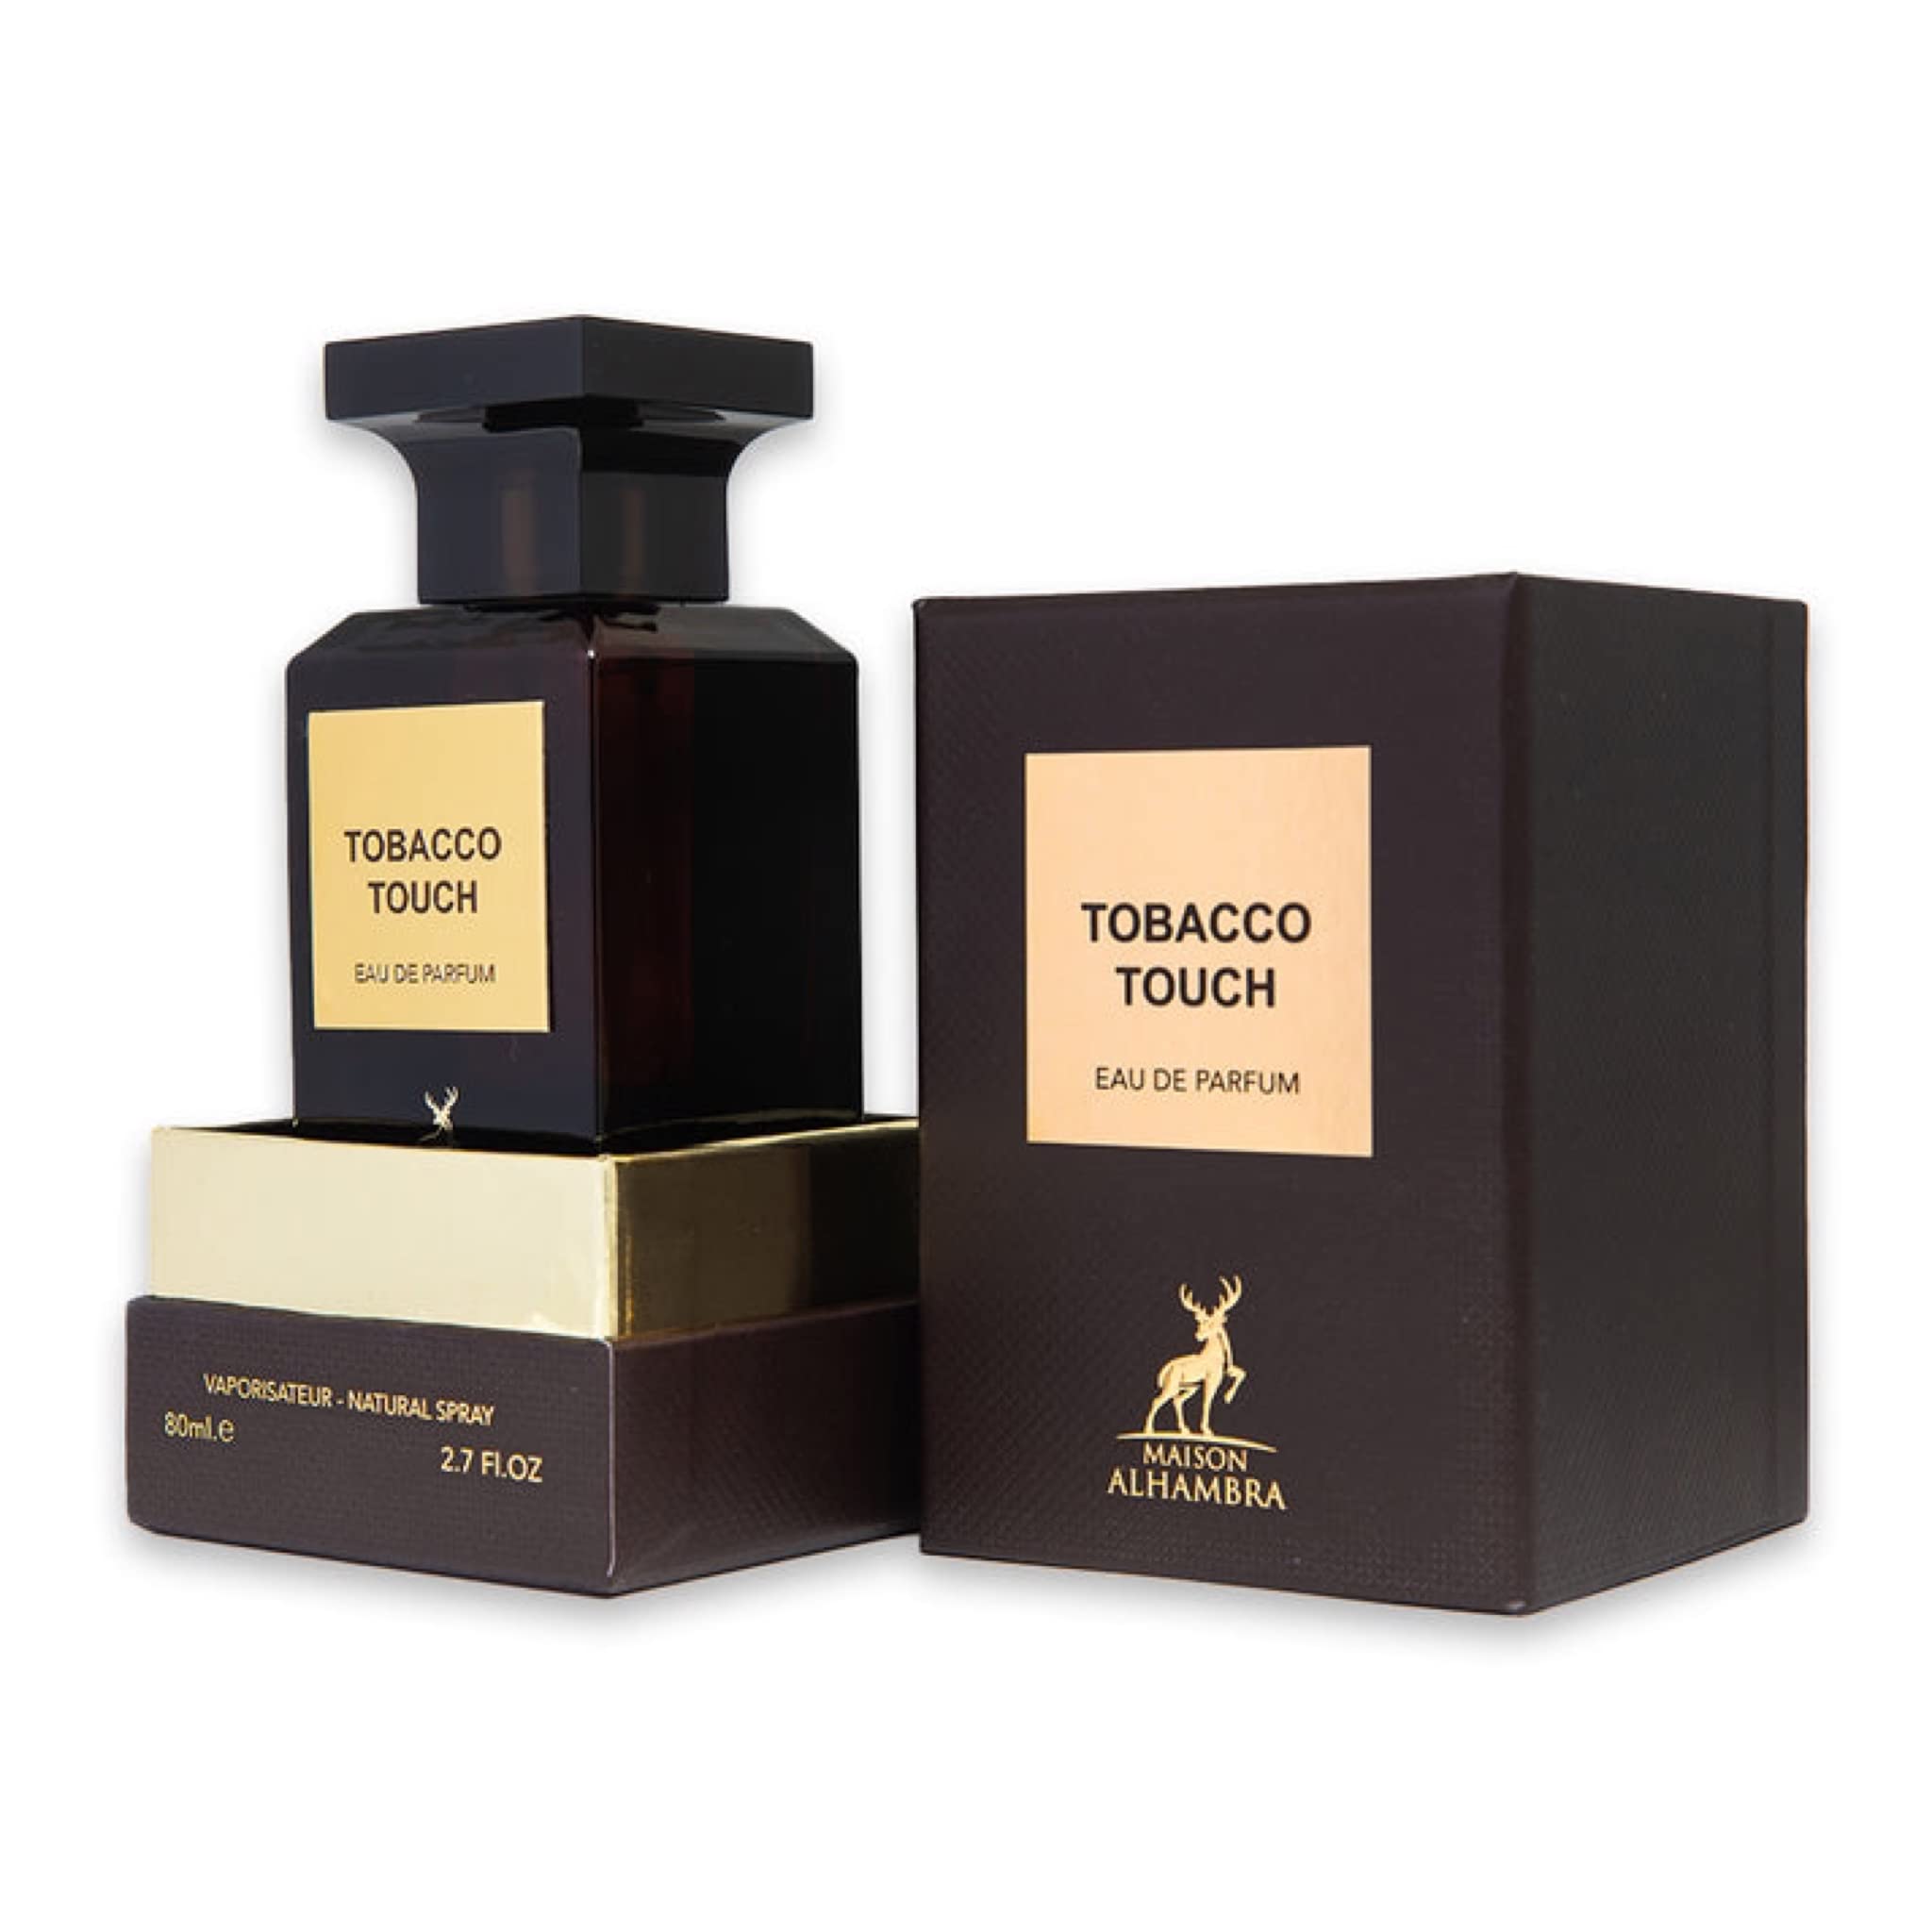 Tobacco Touch EDP Perfume By Maison Alhambra 80 ML 2.7 Fl Oz (Pack of 1)